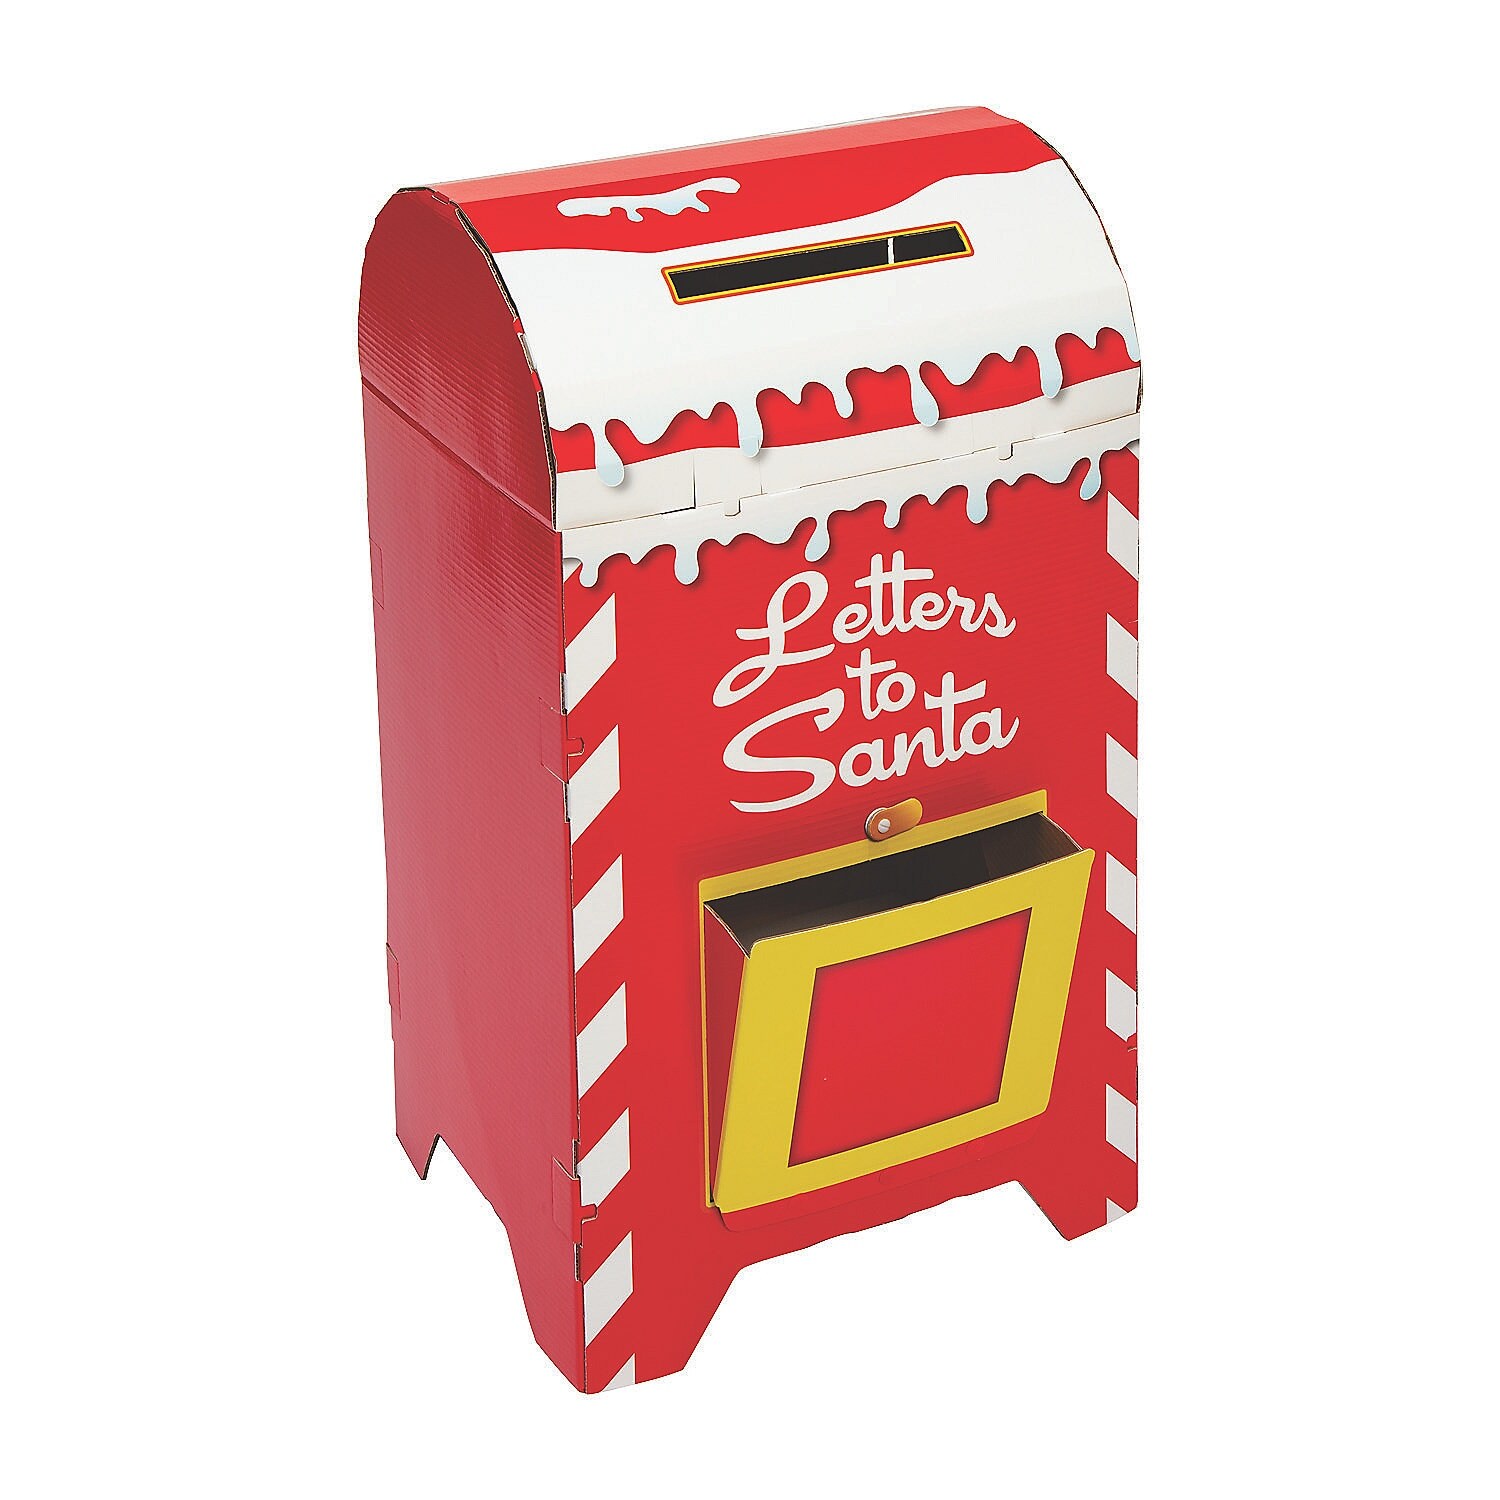 WOODEN LETTER BOX - WHITE with GOLD - Santa Mailbox Letters for